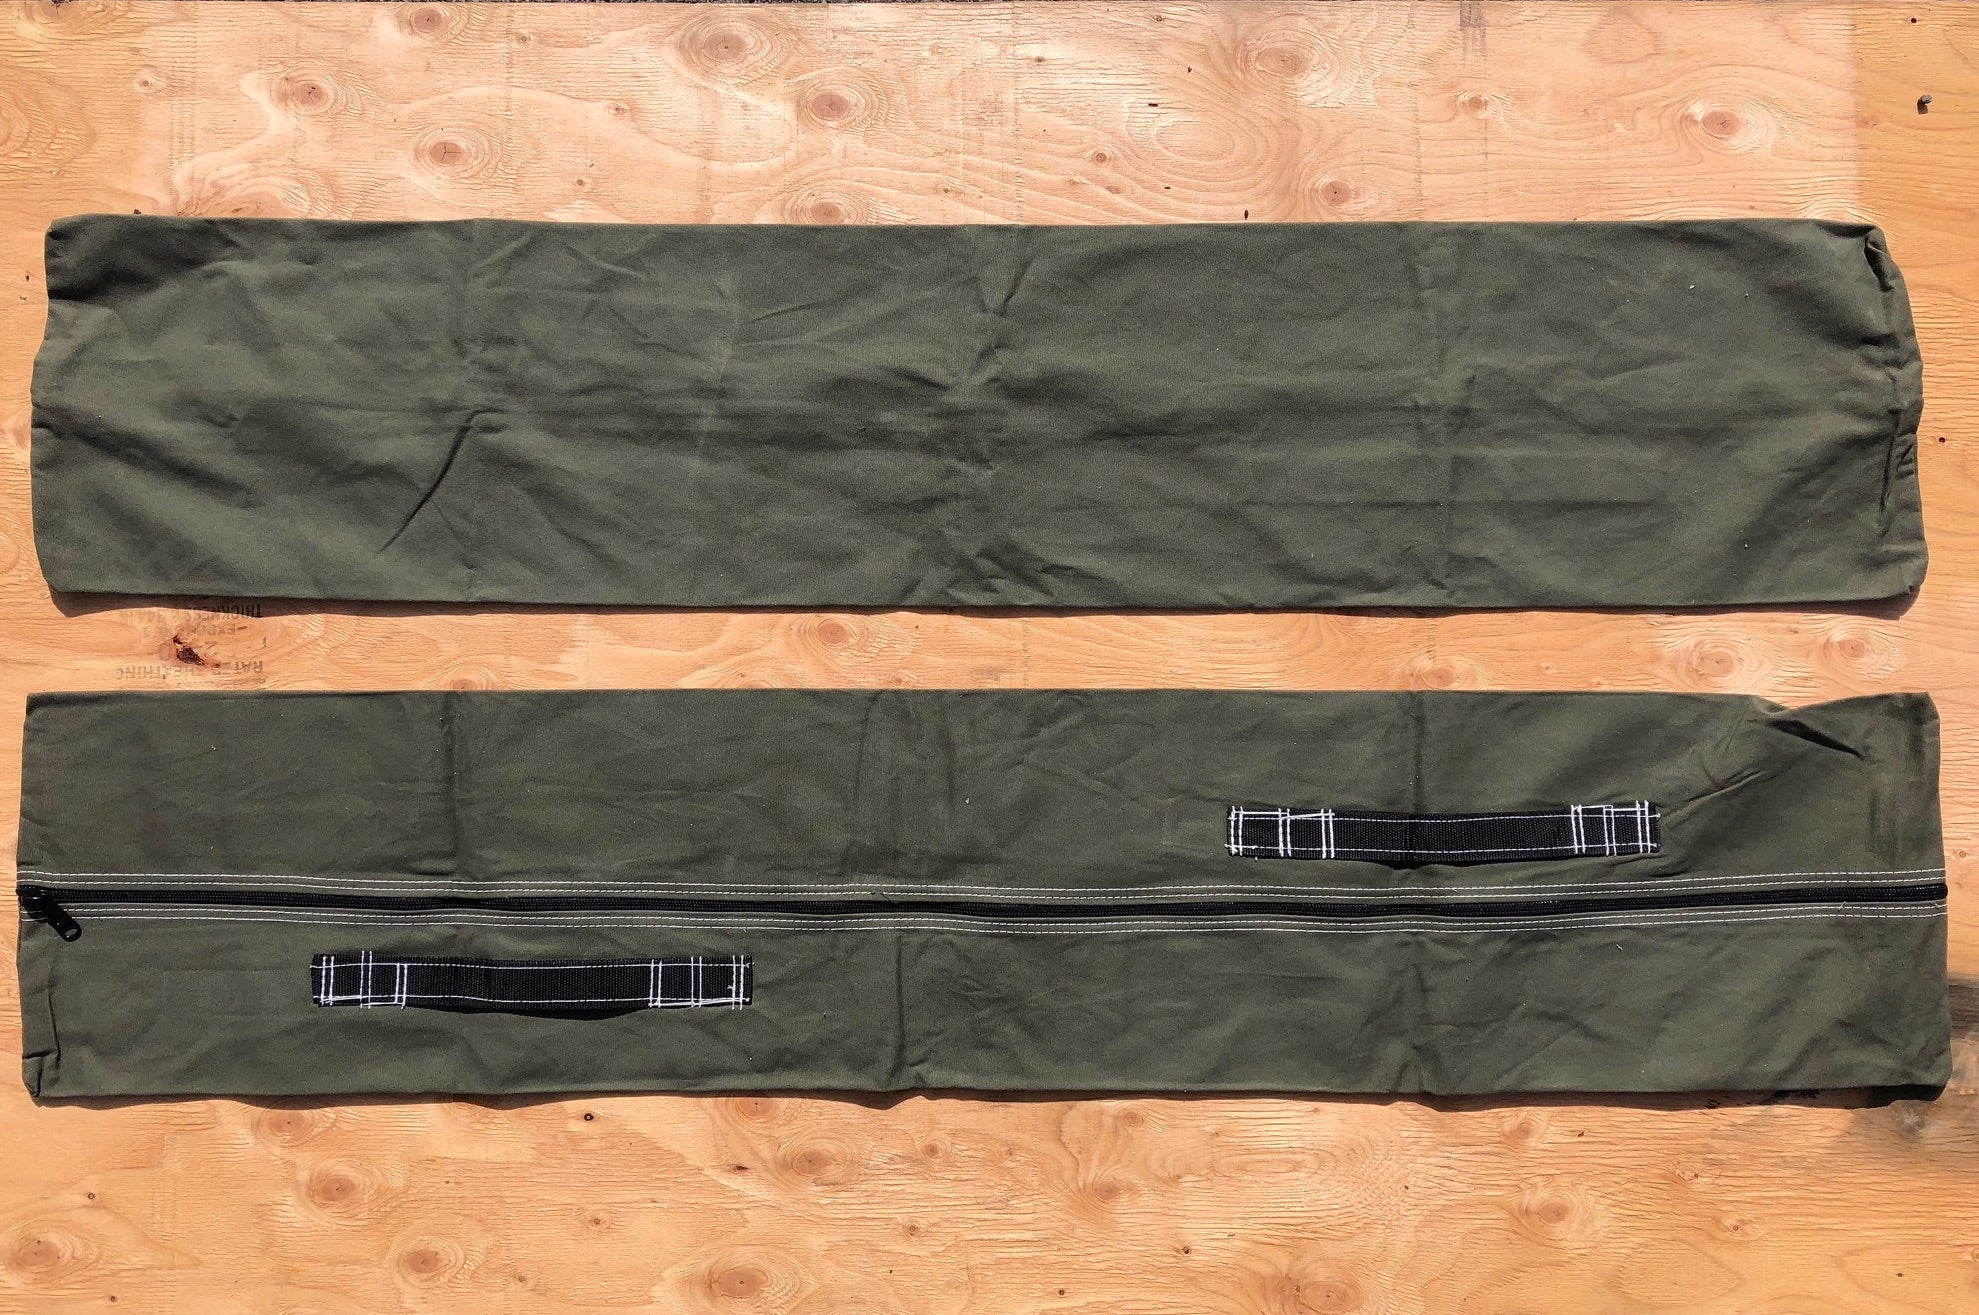 Green frame bag with two handles.